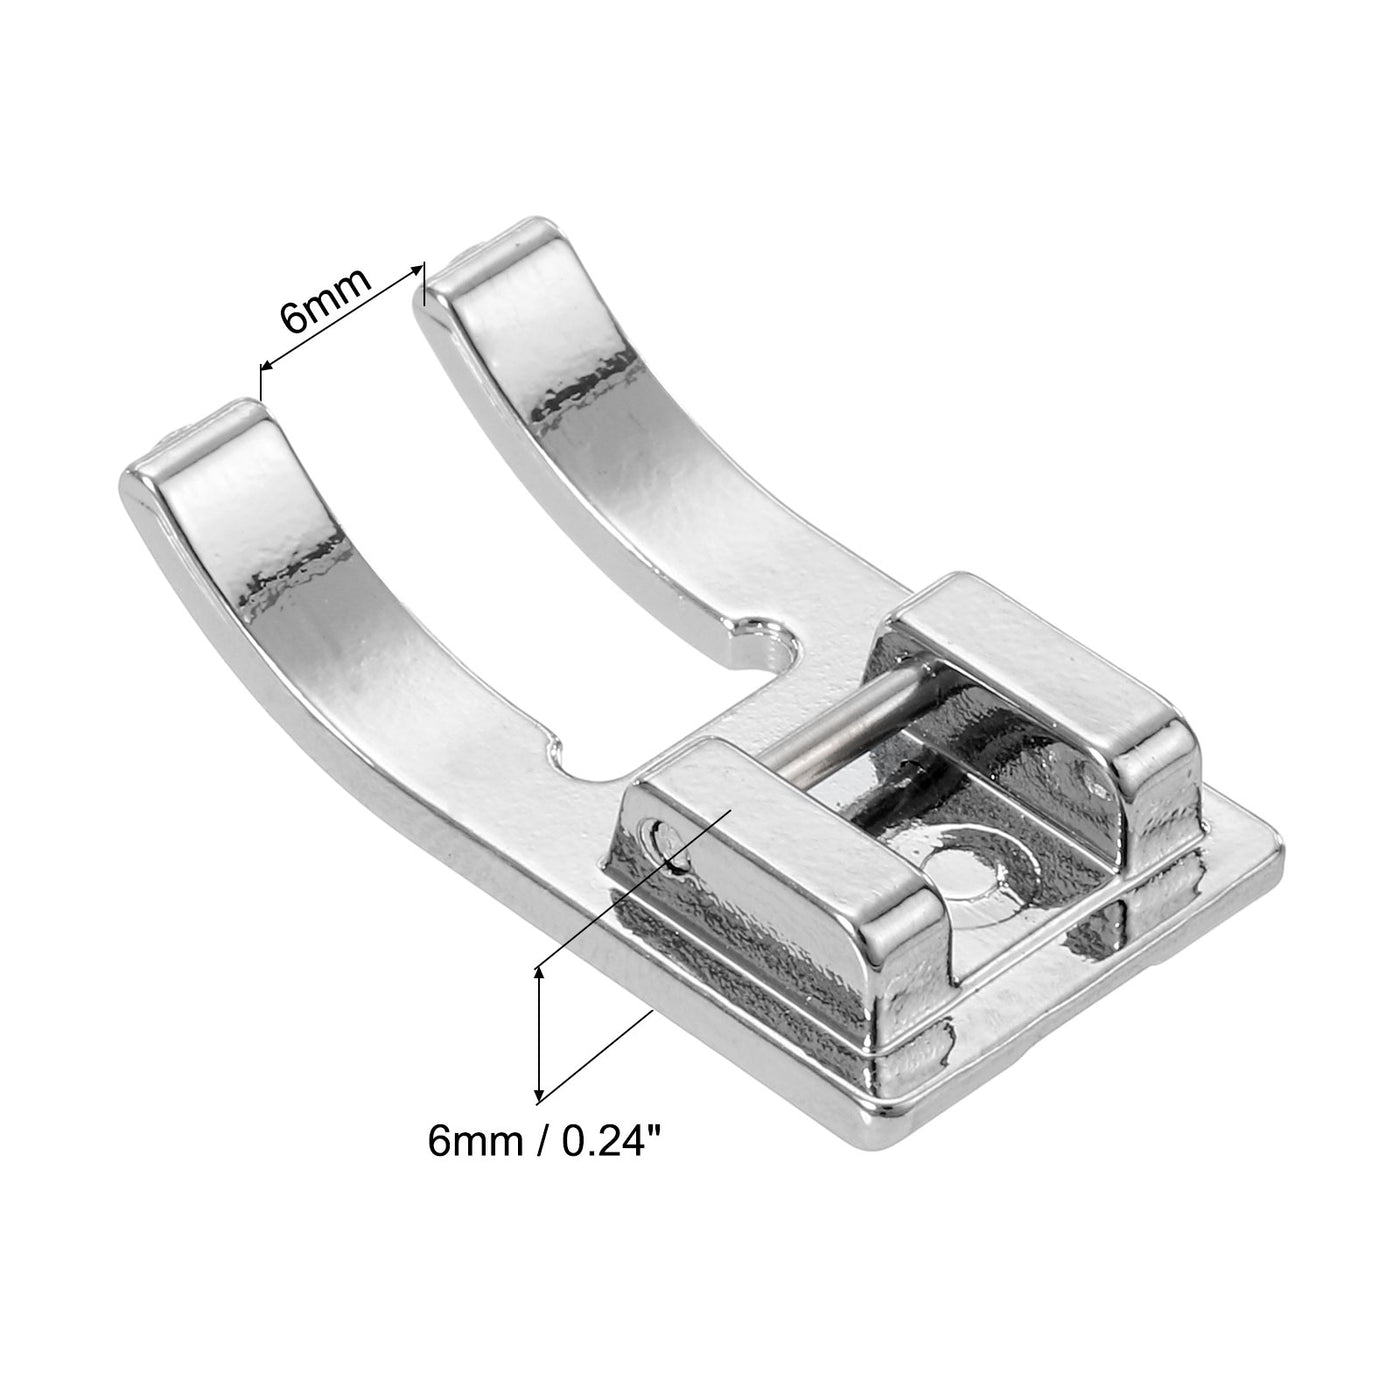 uxcell Uxcell Open Toe Foot Sewing Machine Foot Galvanized Iron Presser Foot 29x15mm, 2Pcs